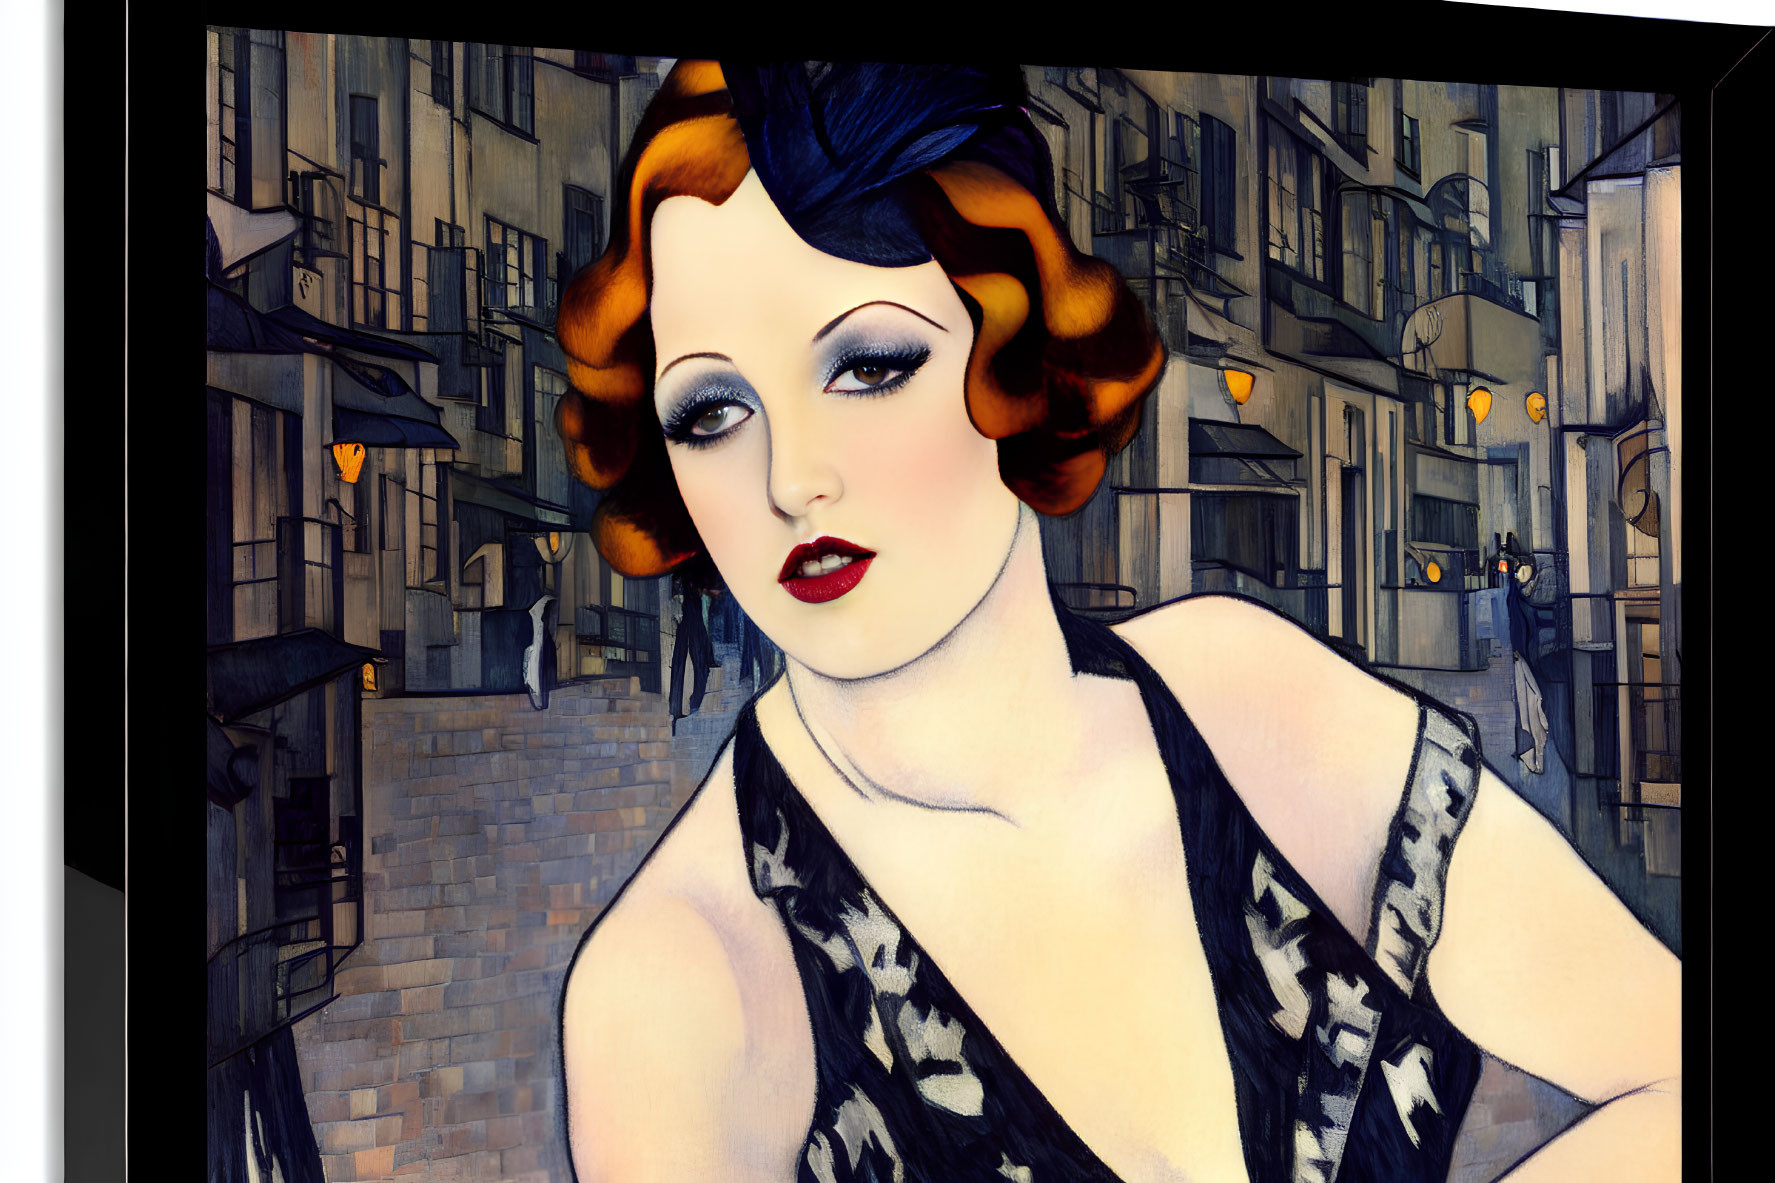 Art Deco Style Painting of Woman in 1920s Fashion